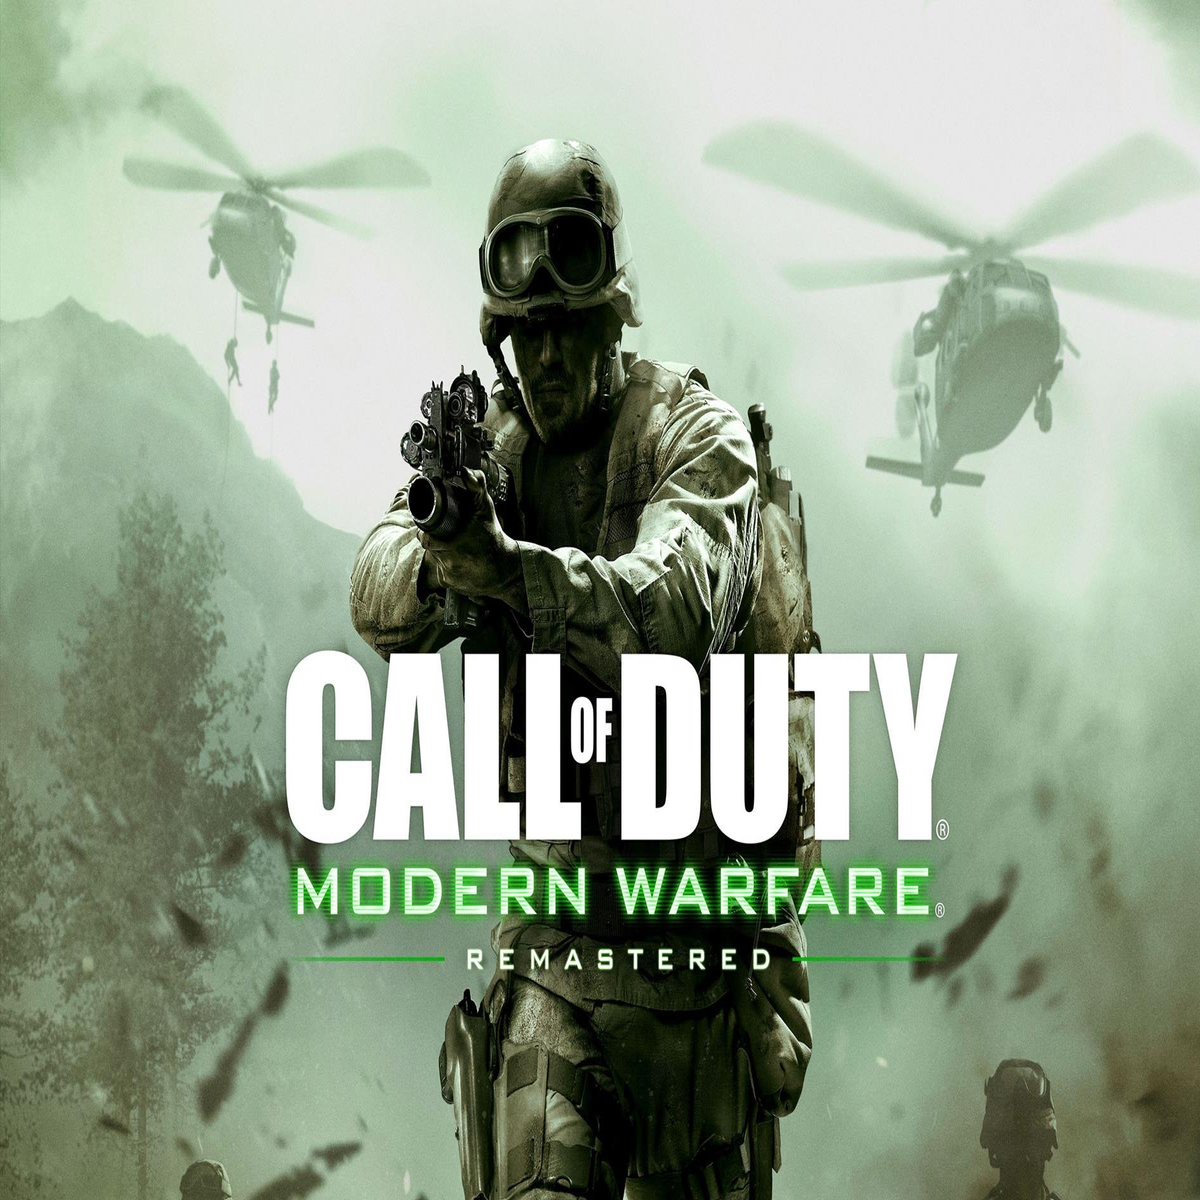 standalone Modern month Remastered Duty: Gamefly | VG247 next release Warfare listing of suggests Call